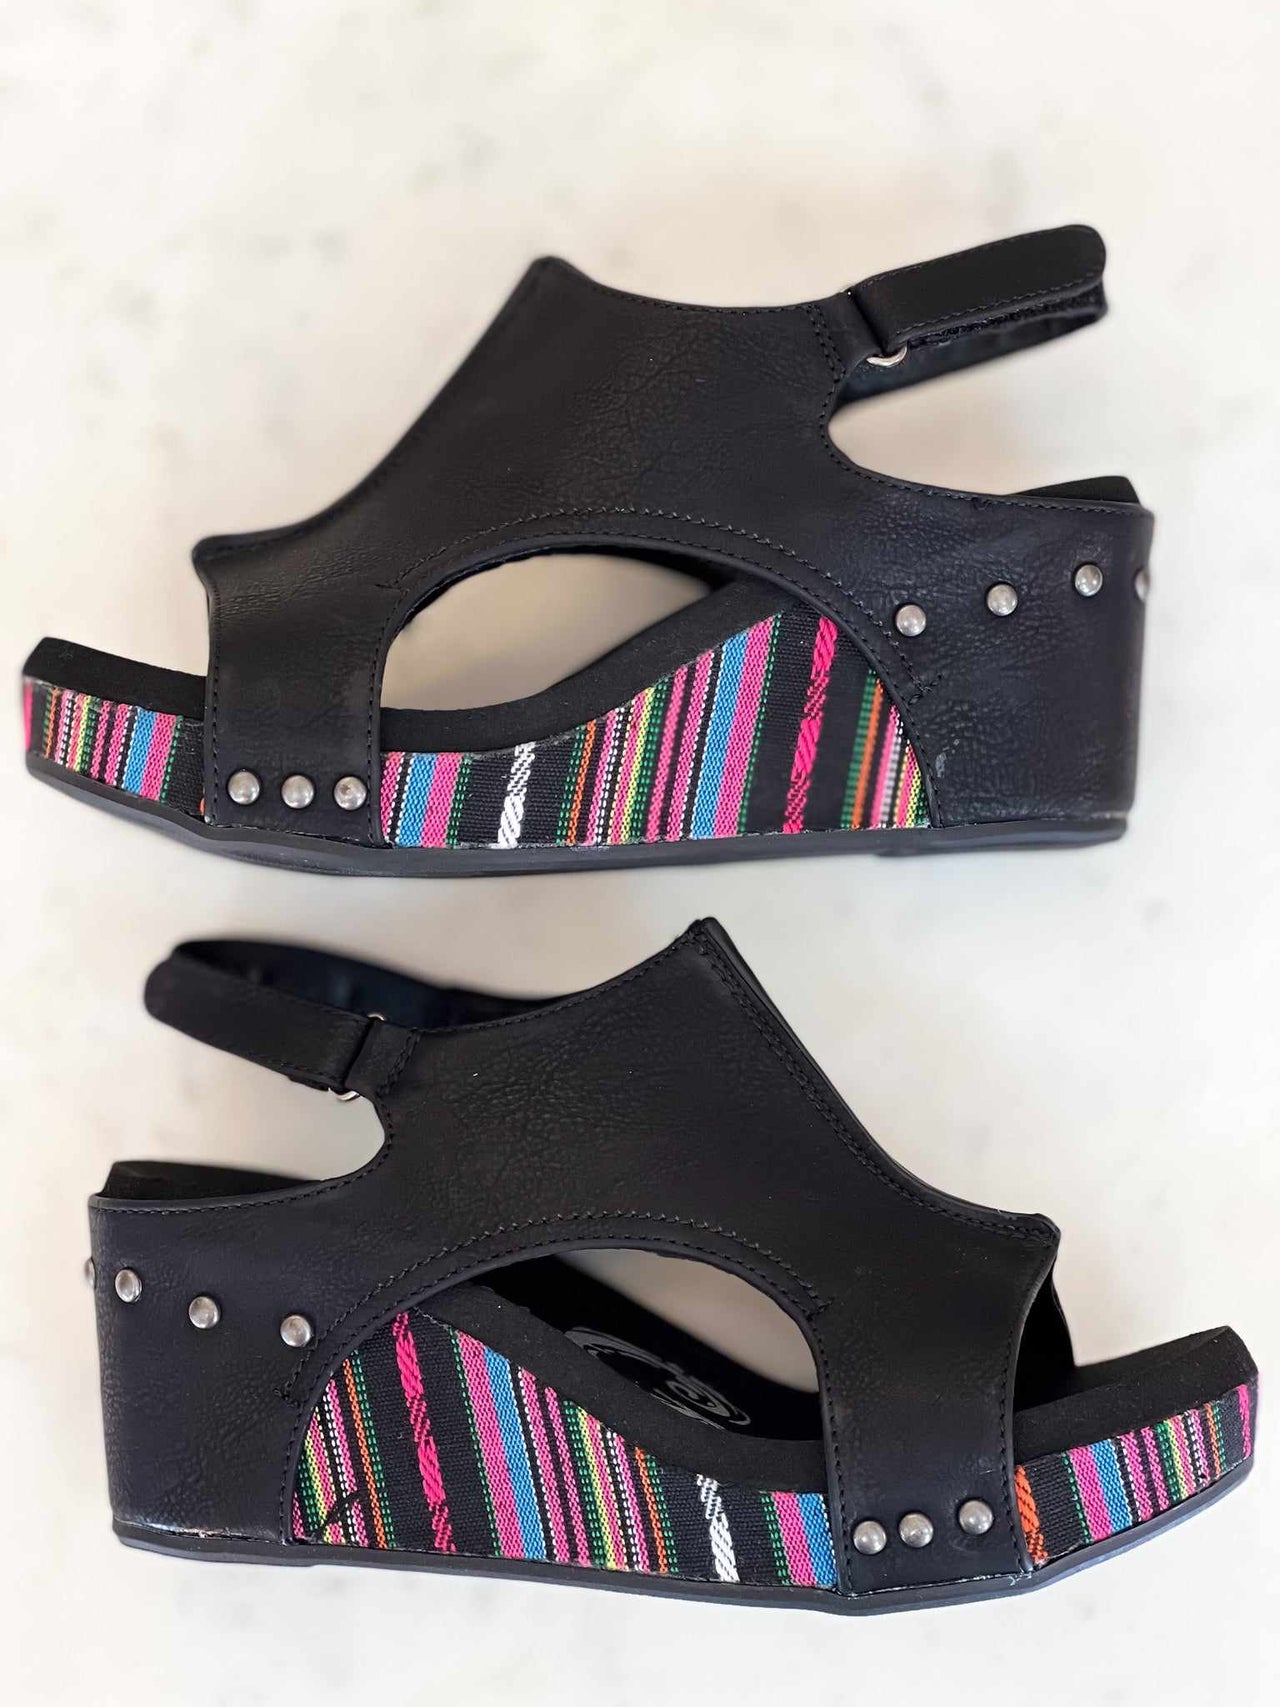 Black and pink wedge sandals.